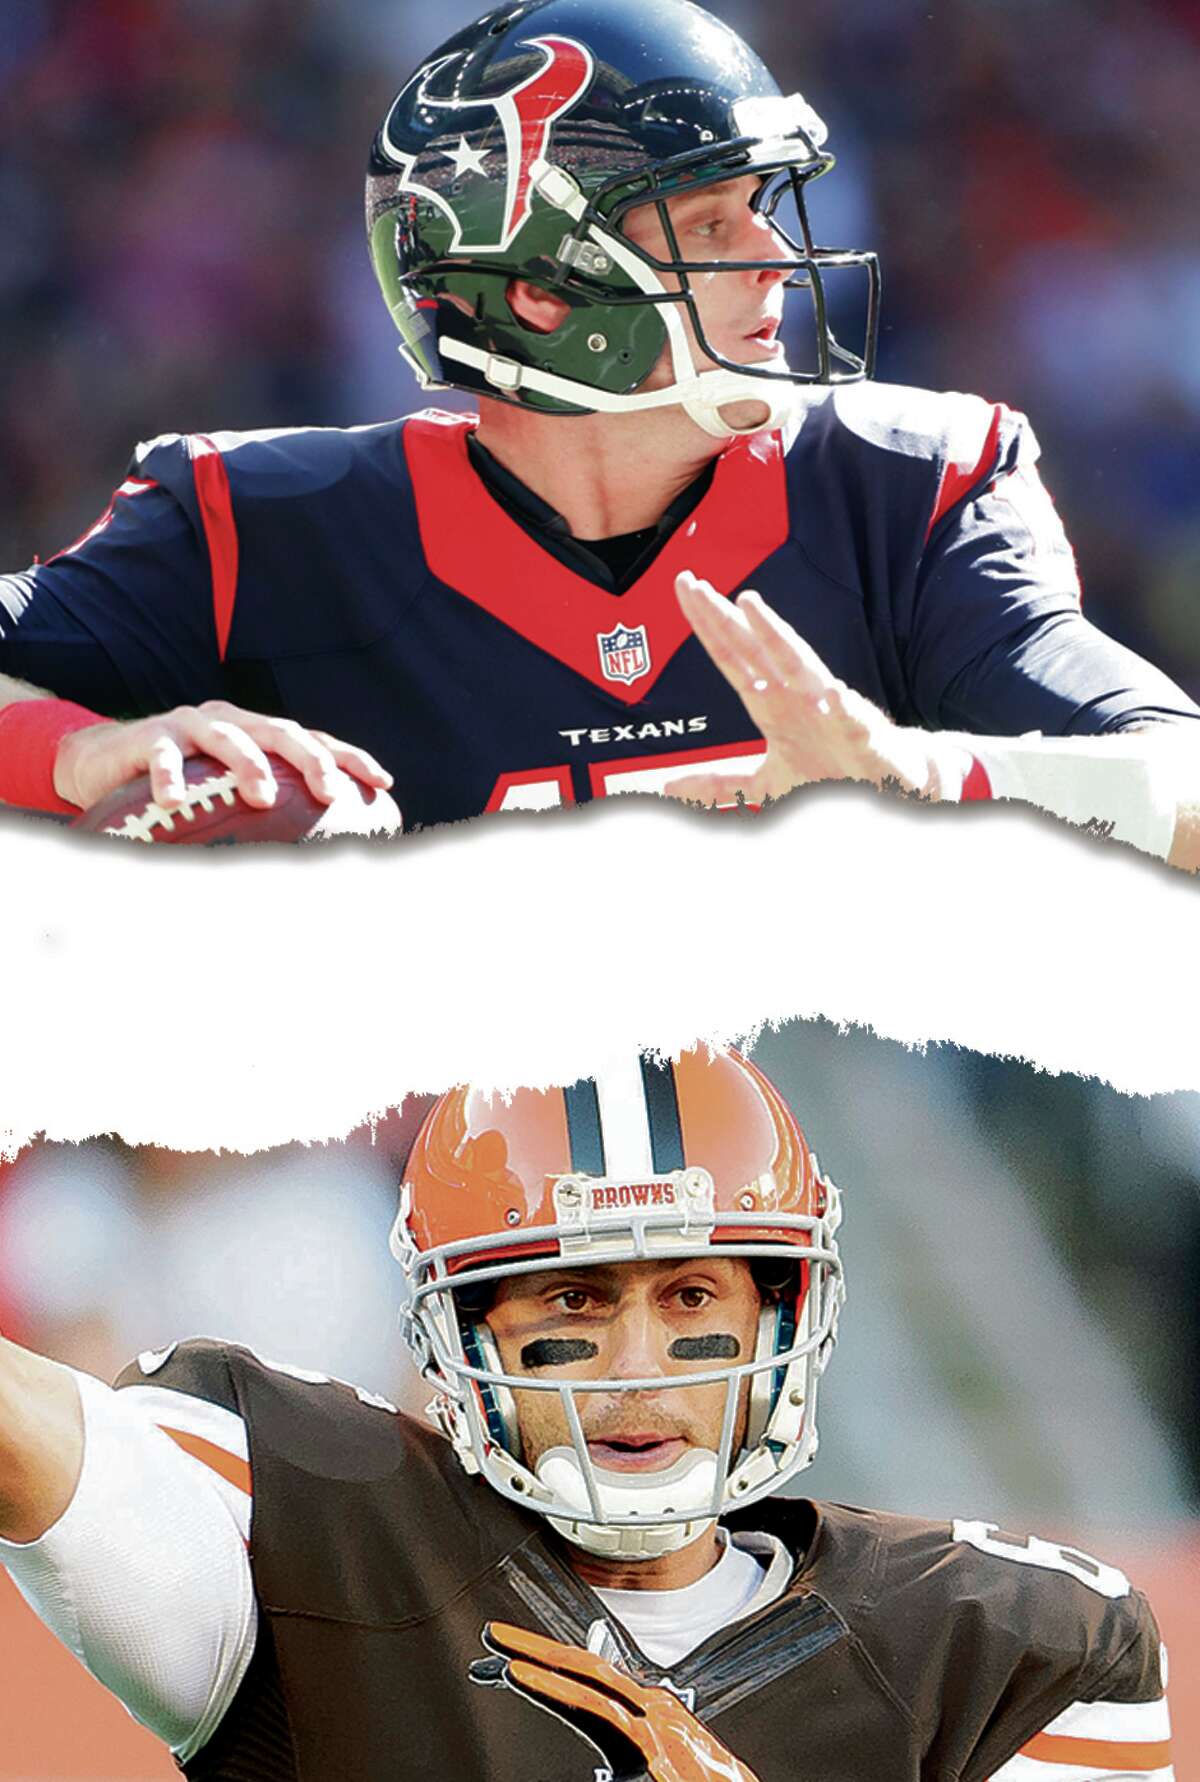 Ryan Mallett, top, and the Texans got the best of Brian Hoyer and the Browns when the two teams met on Nov. 16. After leading the Texans to a 23-7 victory, Mallett suffered a season-ending pectoral injury the next week.